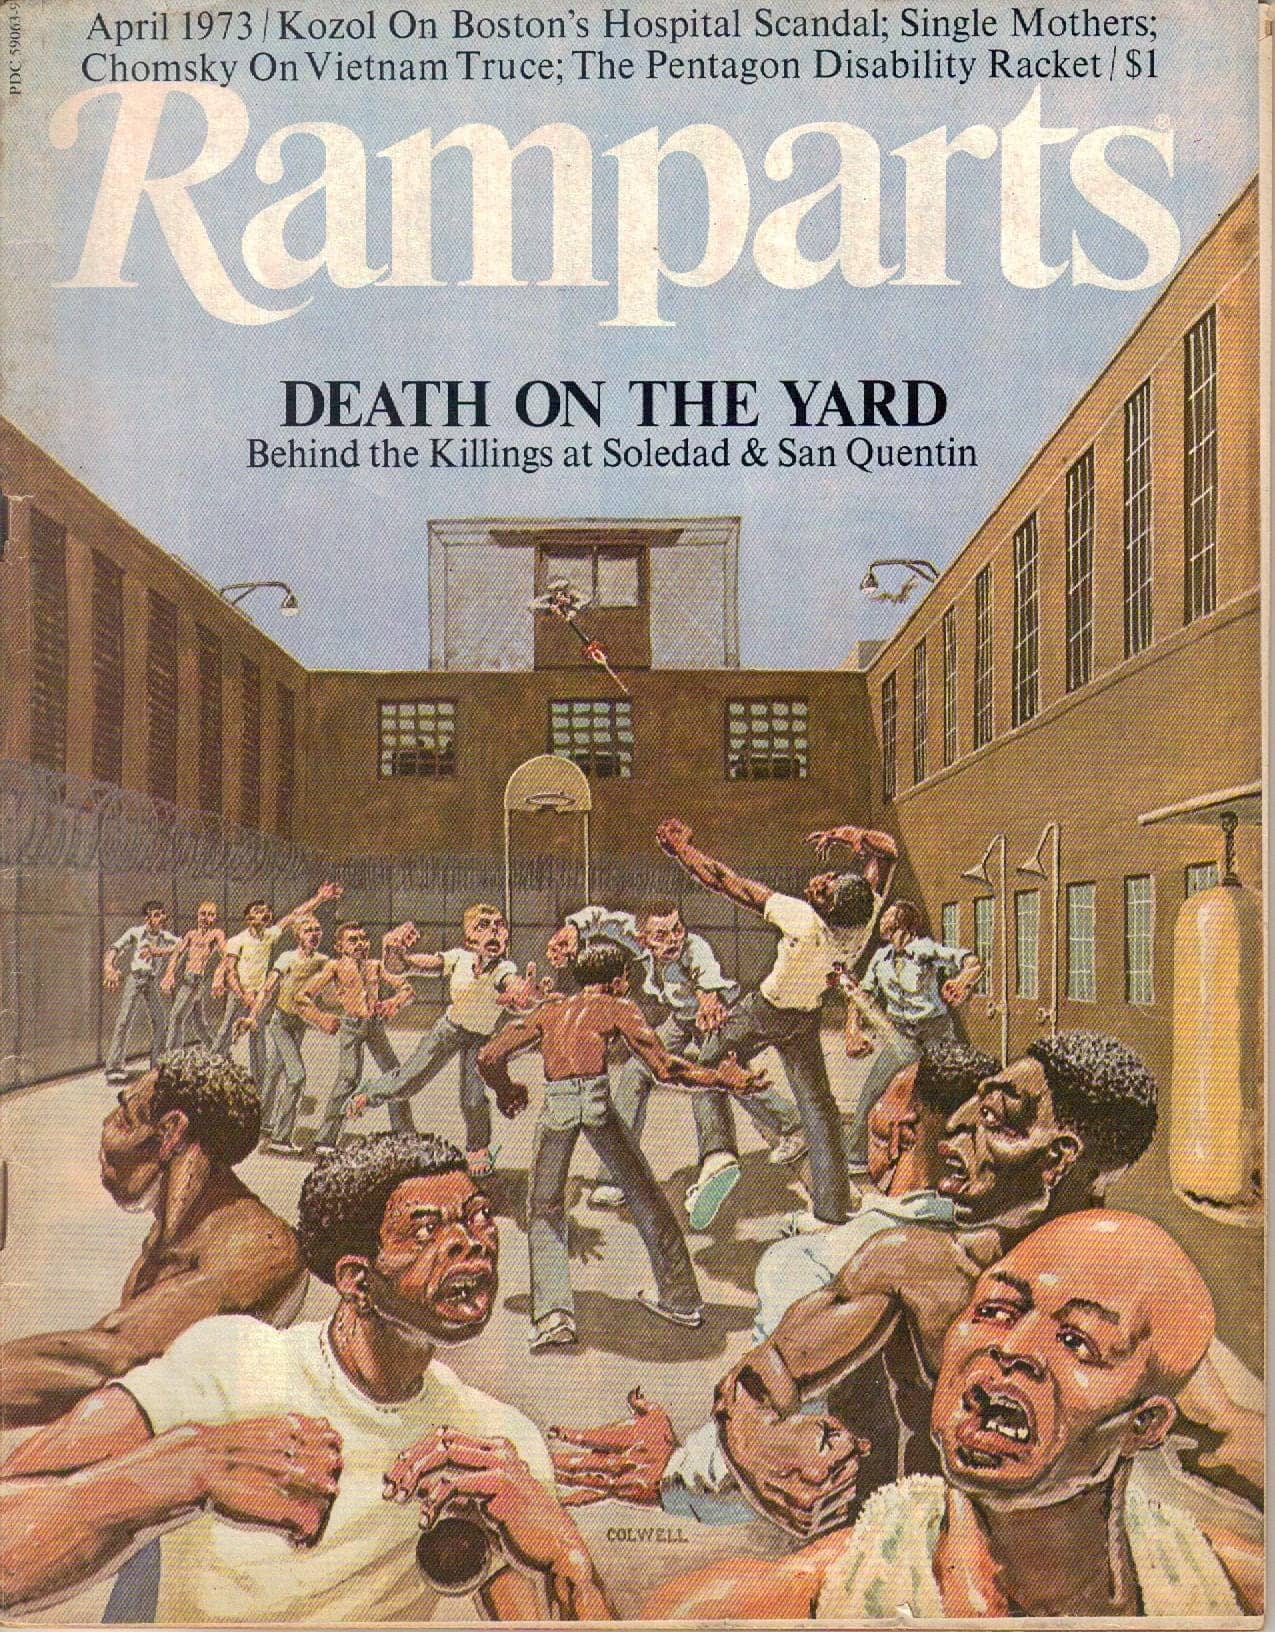 Death-on-the-Yard-Behind-the-Killings-at-Soledad-San-Quentin’-cover-Ramparts-magazine-0473, Soledad uncensored: Racism and the hyper-policing of Black bodies, Part 1, Behind Enemy Lines 